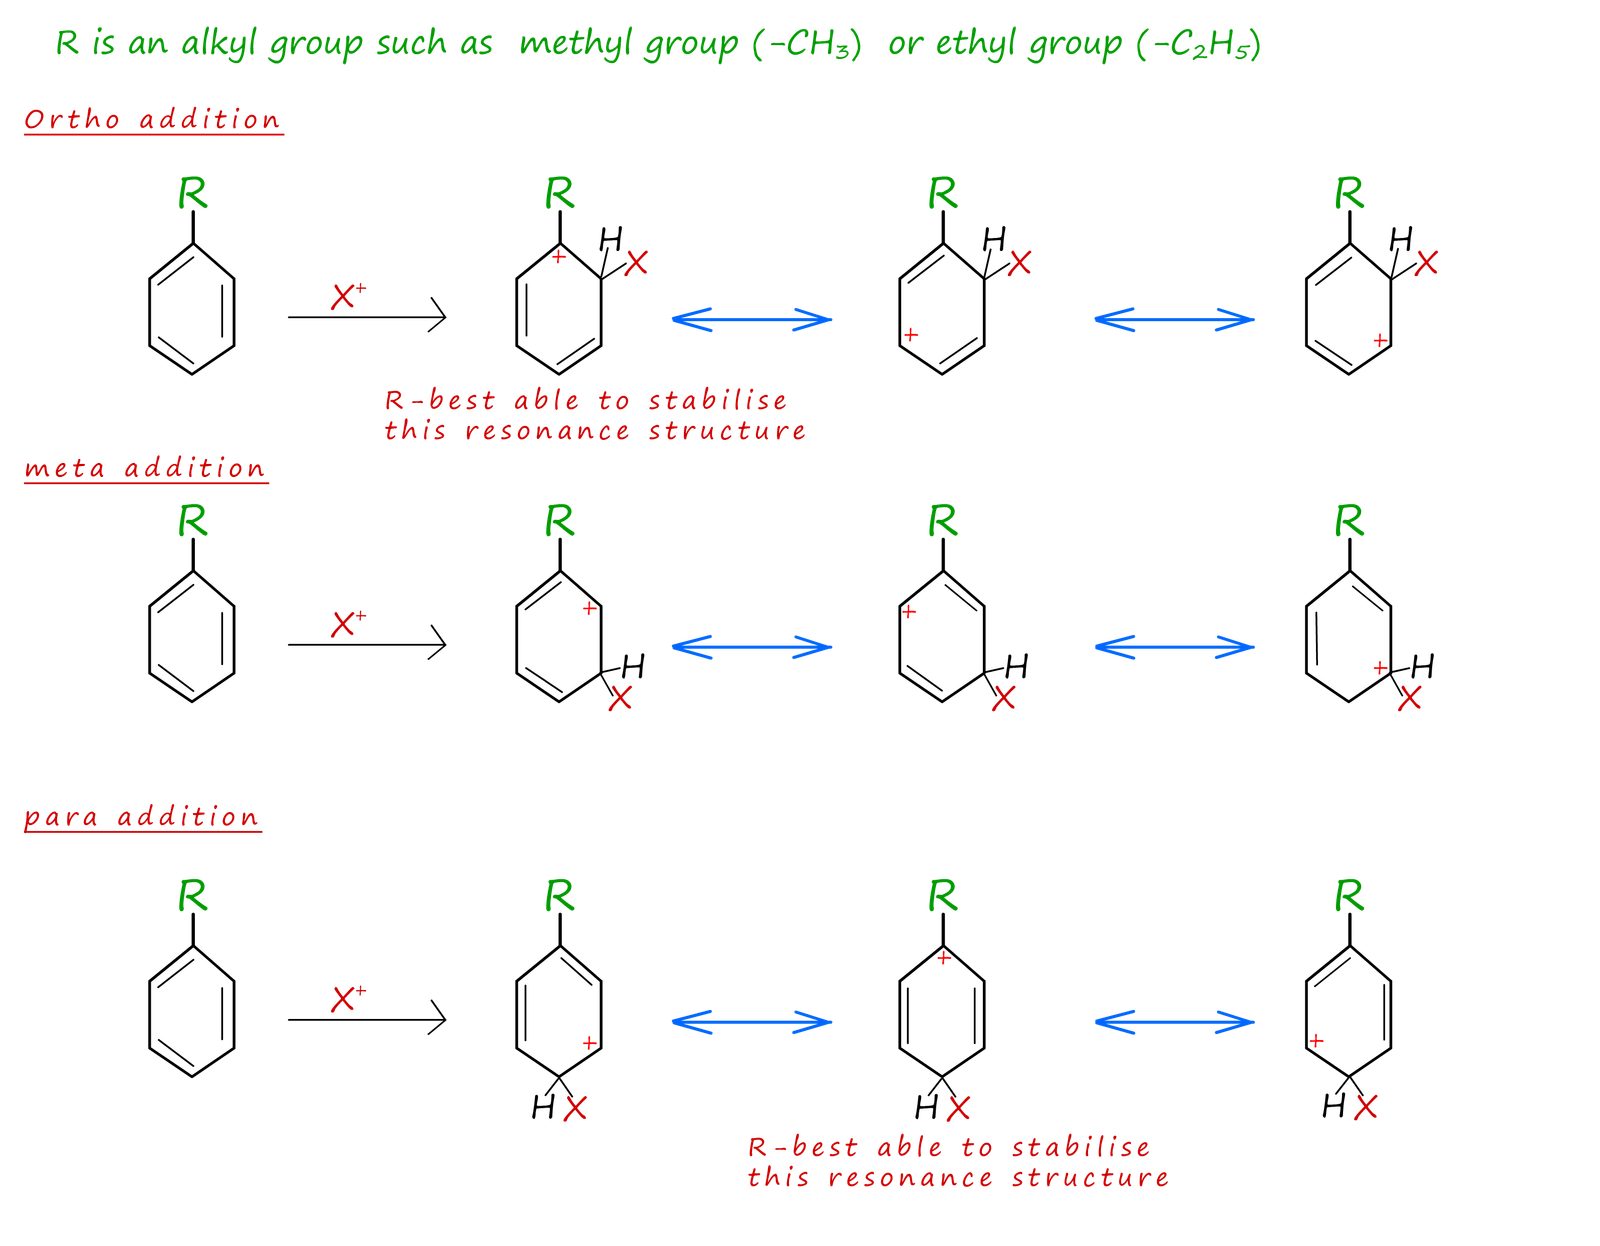 methyl groups are best able to stabilise the carbocation 
when it is in the ortho and para positions